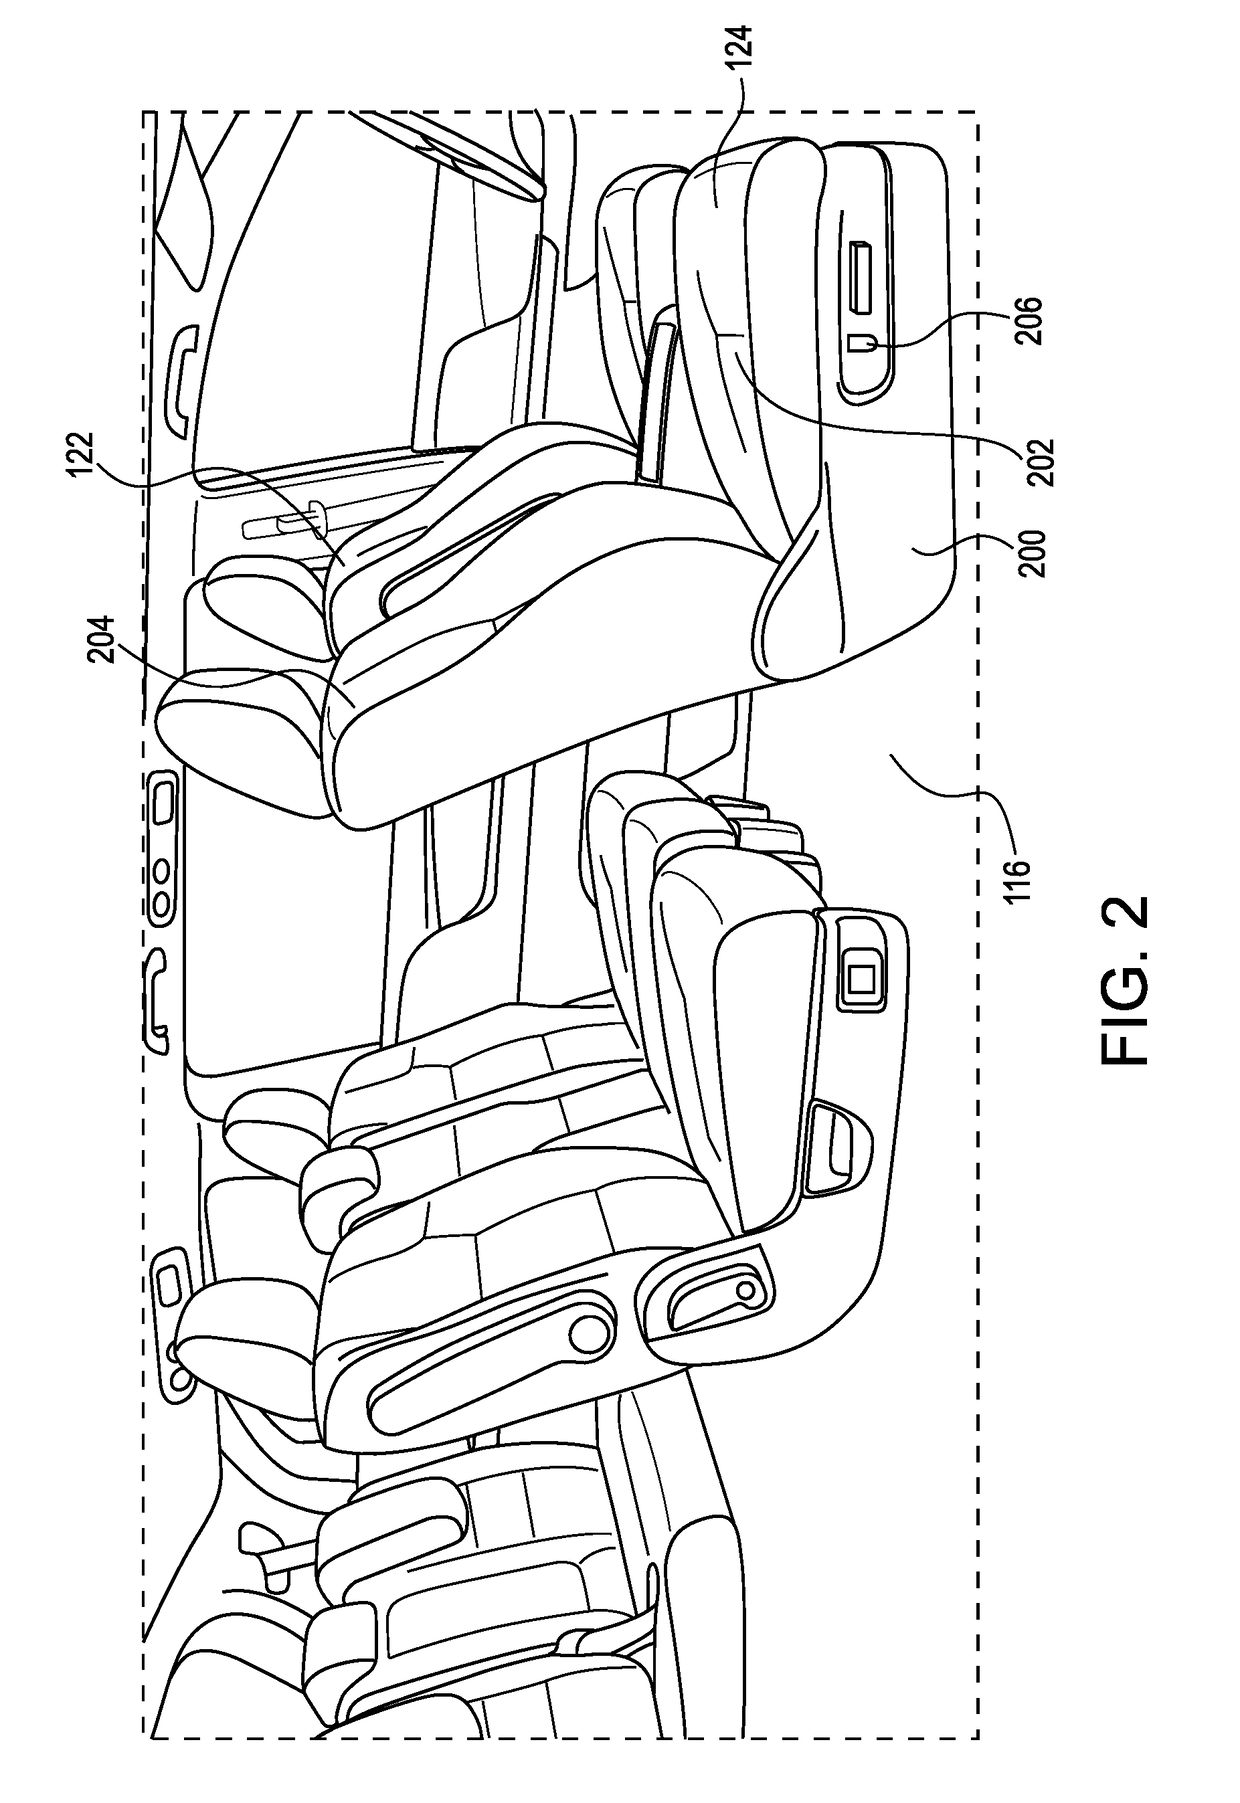 Removable seat for a motor vehicle